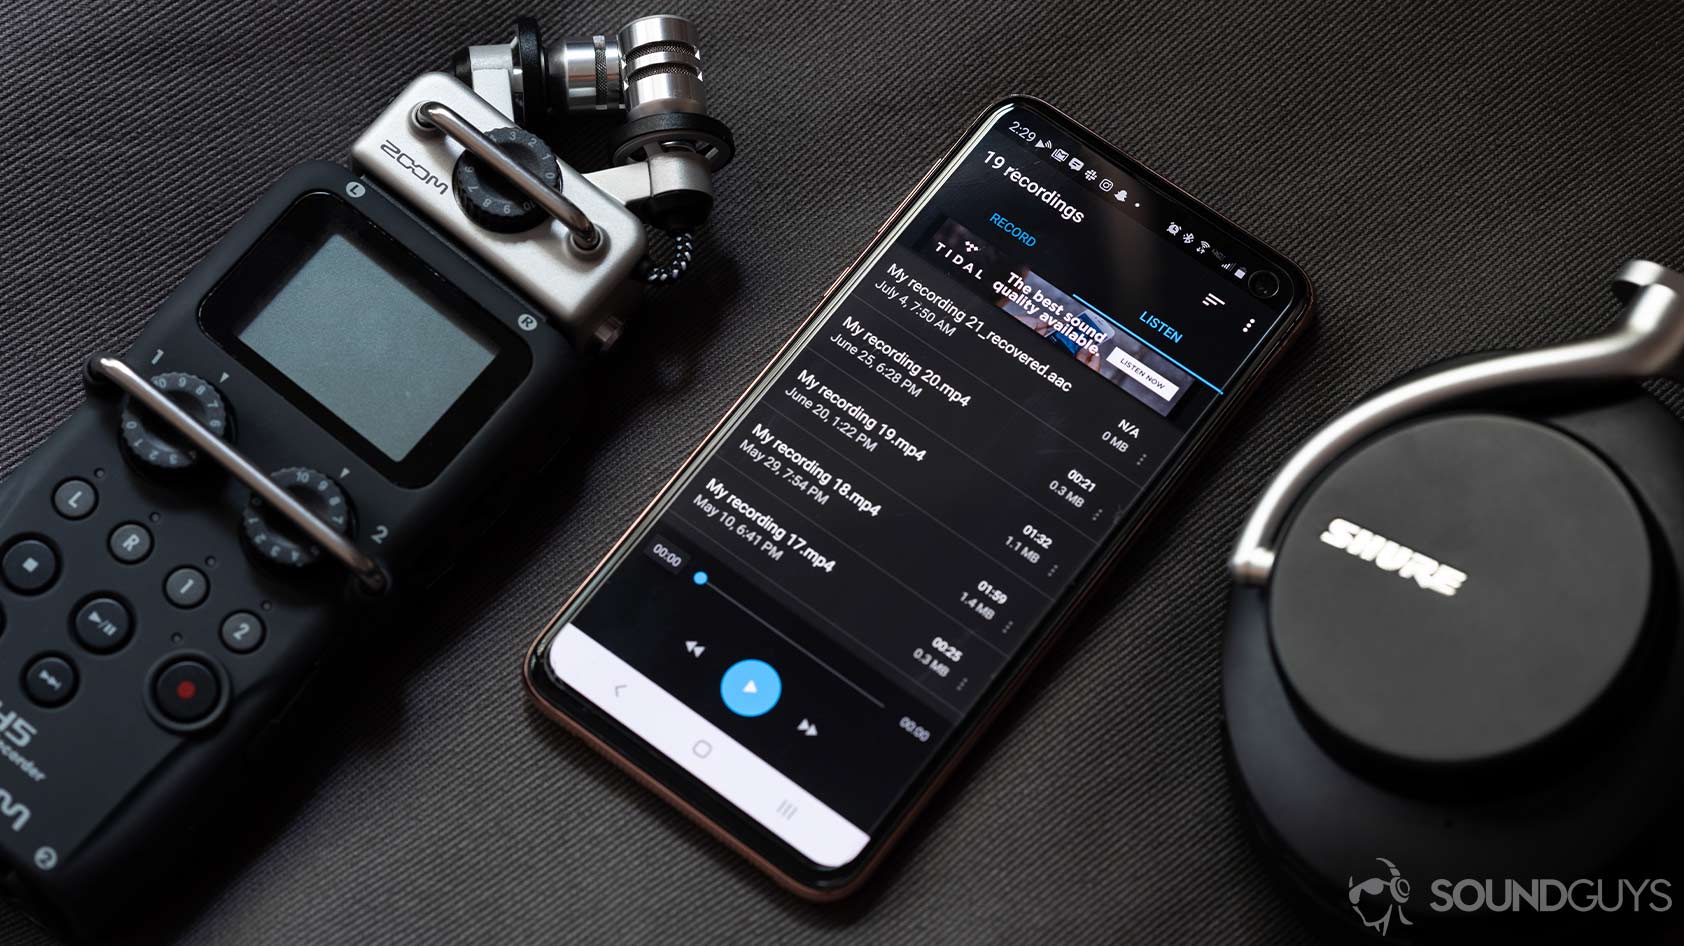 A picture of the Easy Voice Recorder app on a Samsung Galaxy S10e smartphone, flanked by a Zoom recorder and Shure noise canceling headphones.